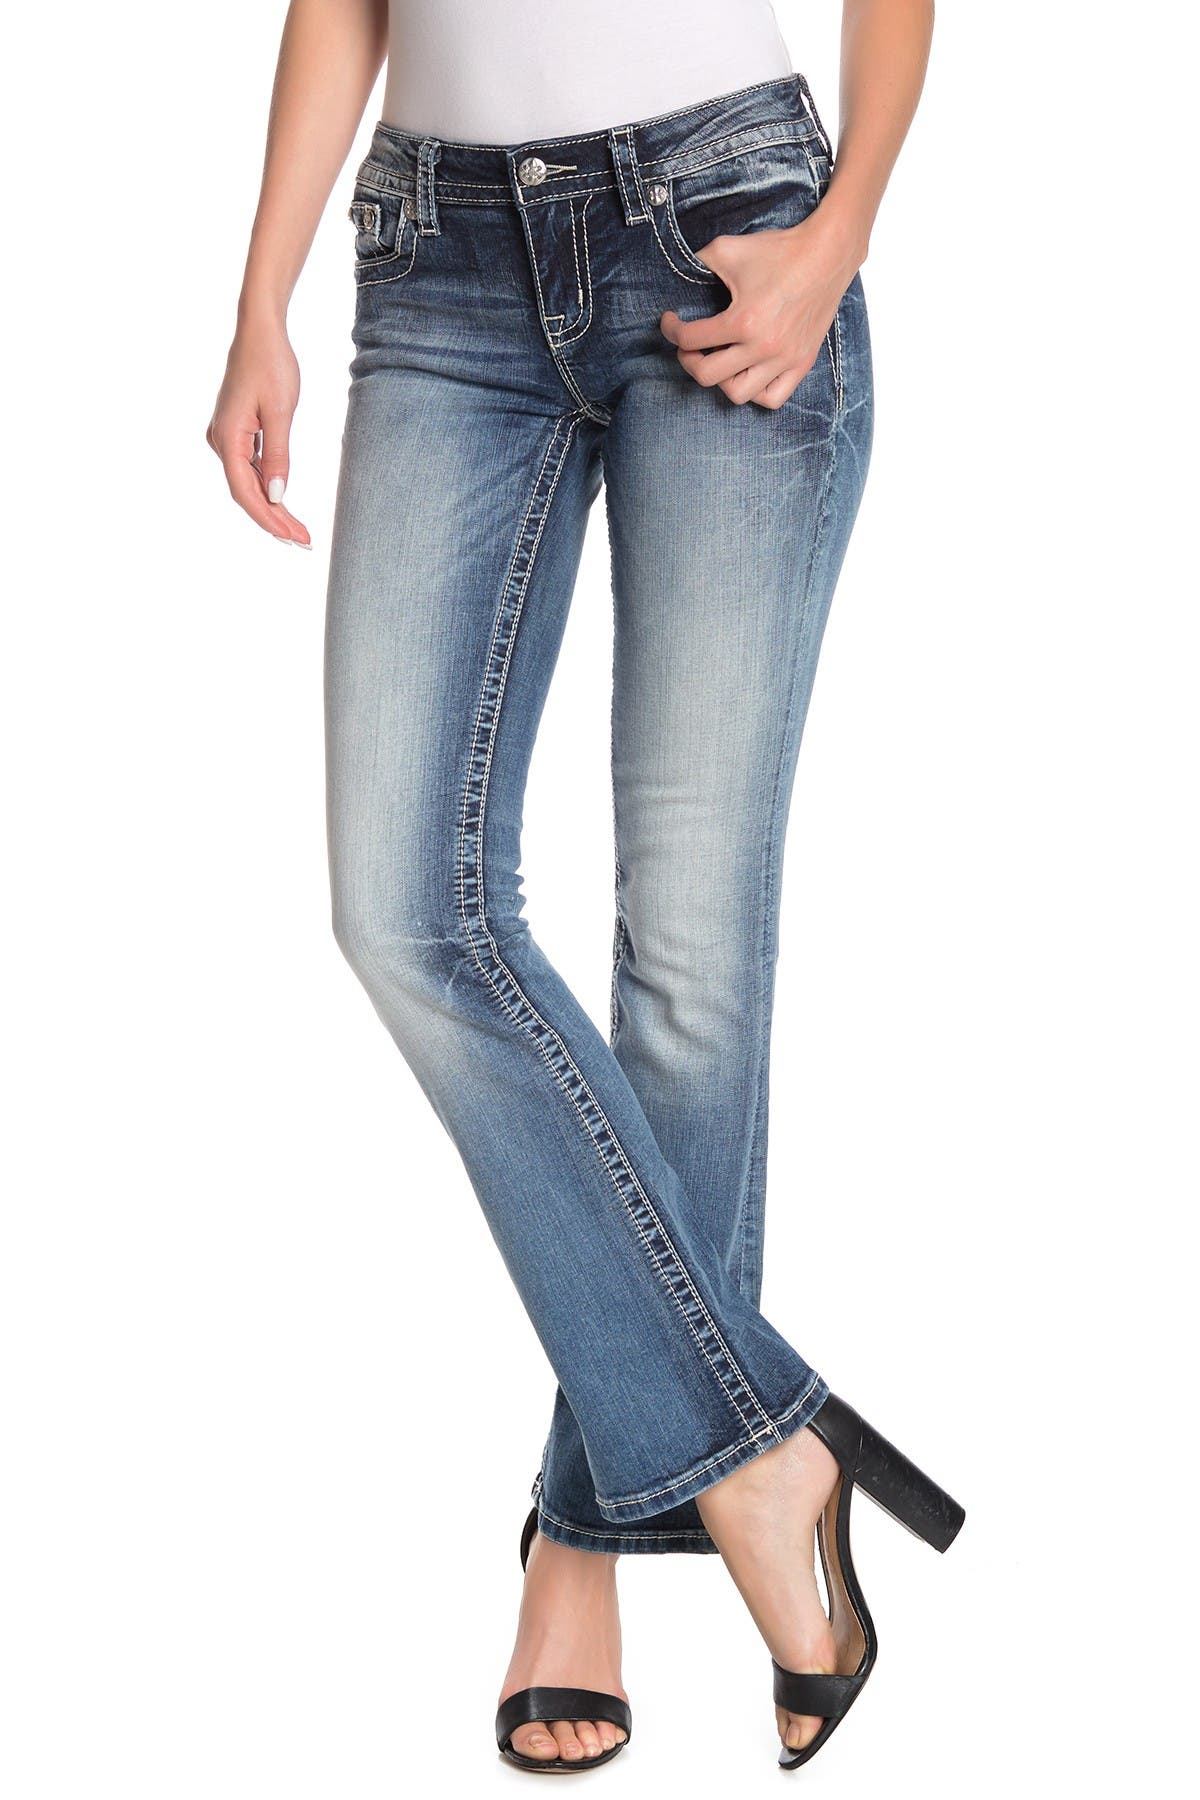 where to buy miss me jeans near me